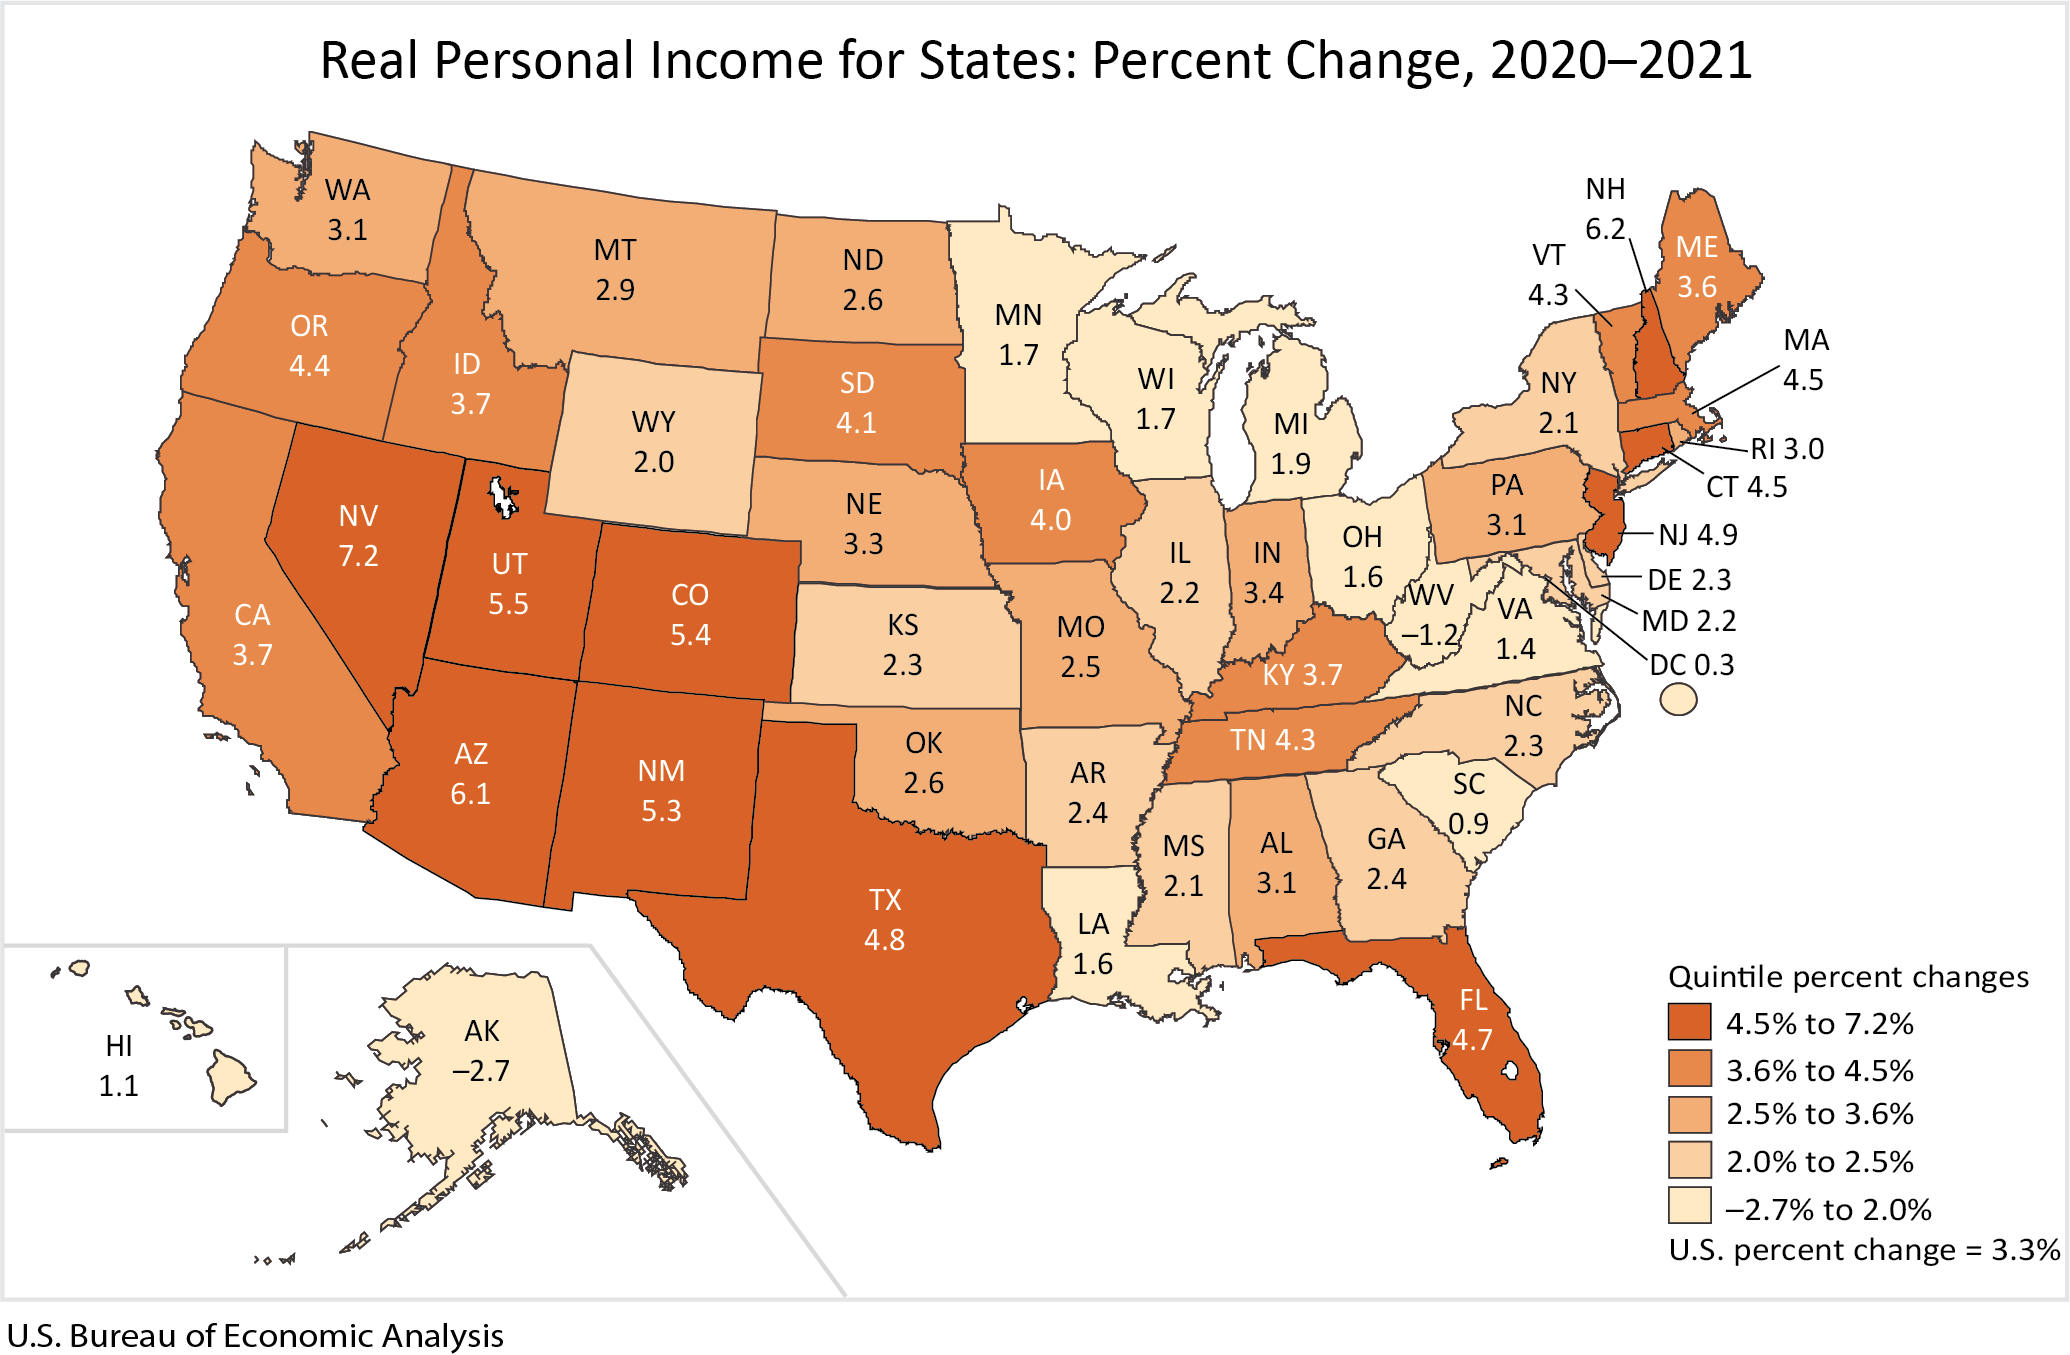 Real Personal Income for States: Percent Change, 2020-2021